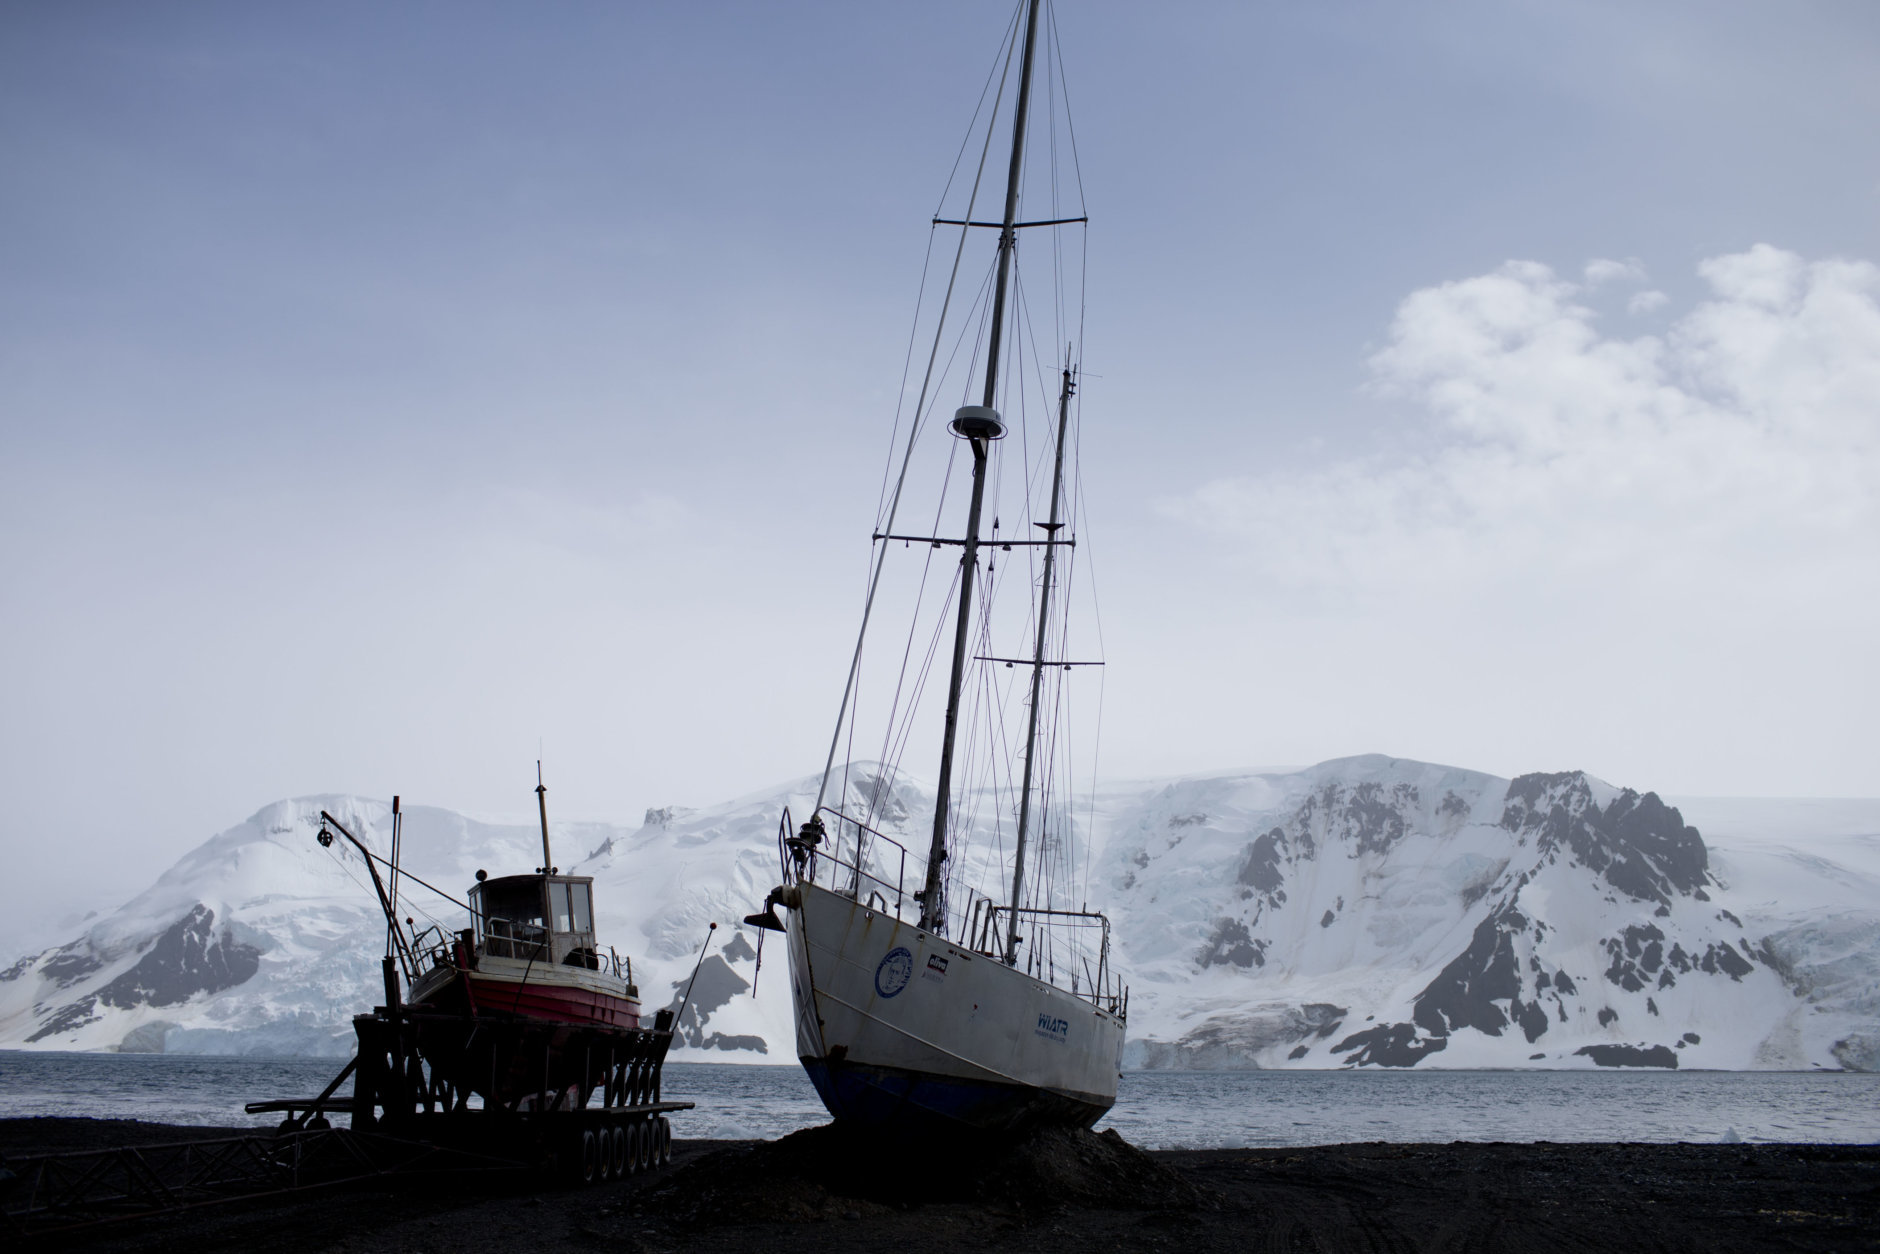 <p><strong>Antarctica</strong></p>
<p>Few cruise destinations are as unconventional as Antarctica. Most major cruise lines &#8212; including <a href="https://travel.usnews.com/cruises/celebrity-cruises-289/">Celebrity Cruises</a>, Holland America Line and <a href="https://travel.usnews.com/cruises/princess-cruises-298/">Princess Cruises</a> &#8212; sail past Antarctica, allowing cruisers to soak in the impressive views of the surrounding scenery. However, <a href="https://travel.usnews.com/cruises/seabourn-cruise-line-1044/">Seabourn Cruise Line</a> and Silversea Cruises are among a few lines that offer outings on shore. Passengers may have the chance to look for seals and penguins on the Antarctic Peninsula if weather and ice conditions are favorable. What&#8217;s more, voyagers can enjoy kayaking tours and cruises on small inflatable boats to Elephant Island and through the Antarctic Sound. Orcas, humpback whales and Commerson&#8217;s dolphins are just some of the aquatic species travelers may see. Cruises that don&#8217;t include shore excursions feature real-time sightseeing commentary from onboard experts.</p>
